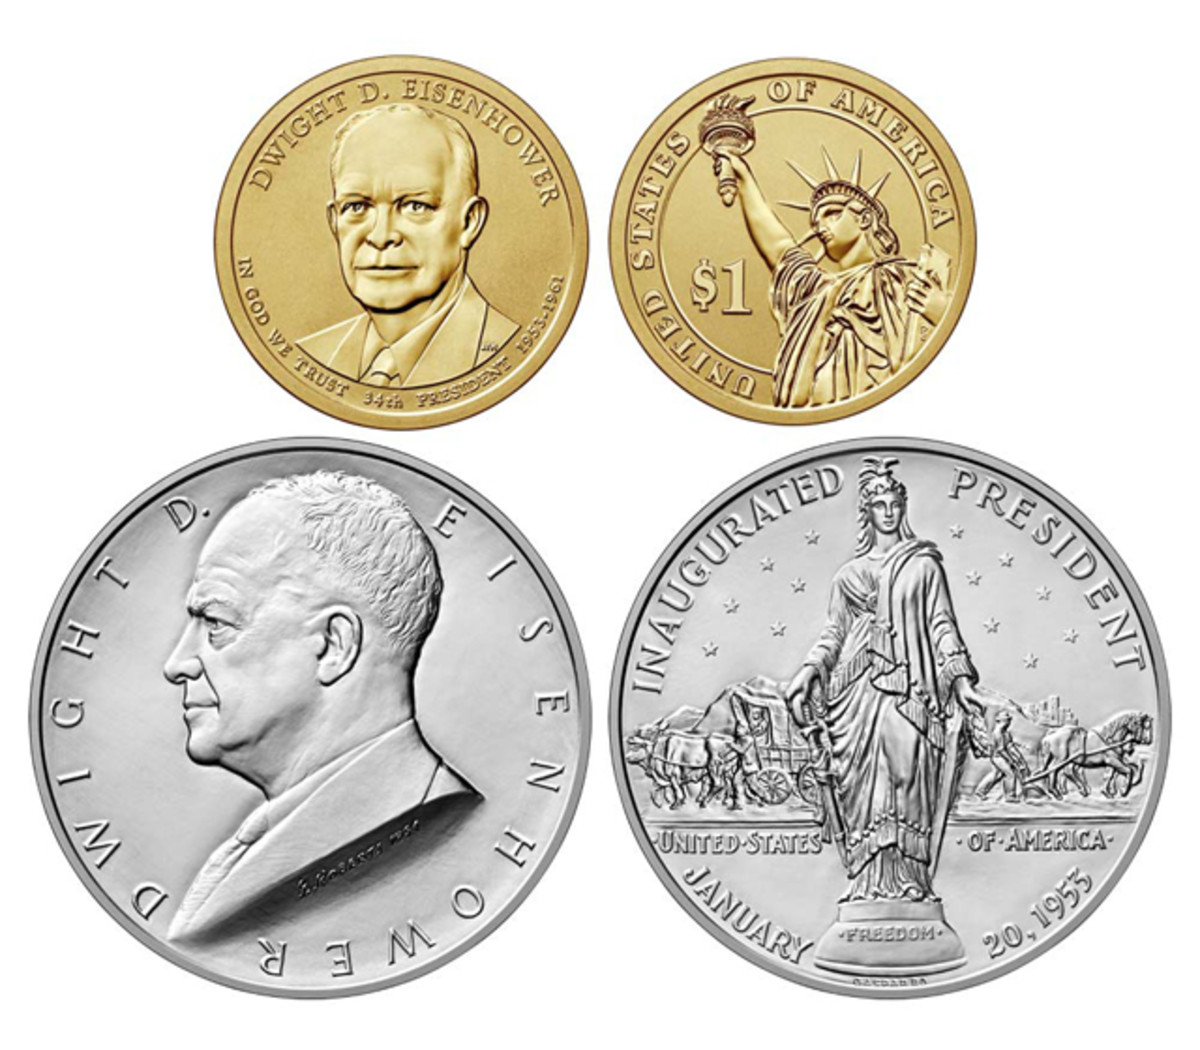 The Ike reverse proof dollar and silver presidential medal are fetching high prices on eBay if they grade -70.